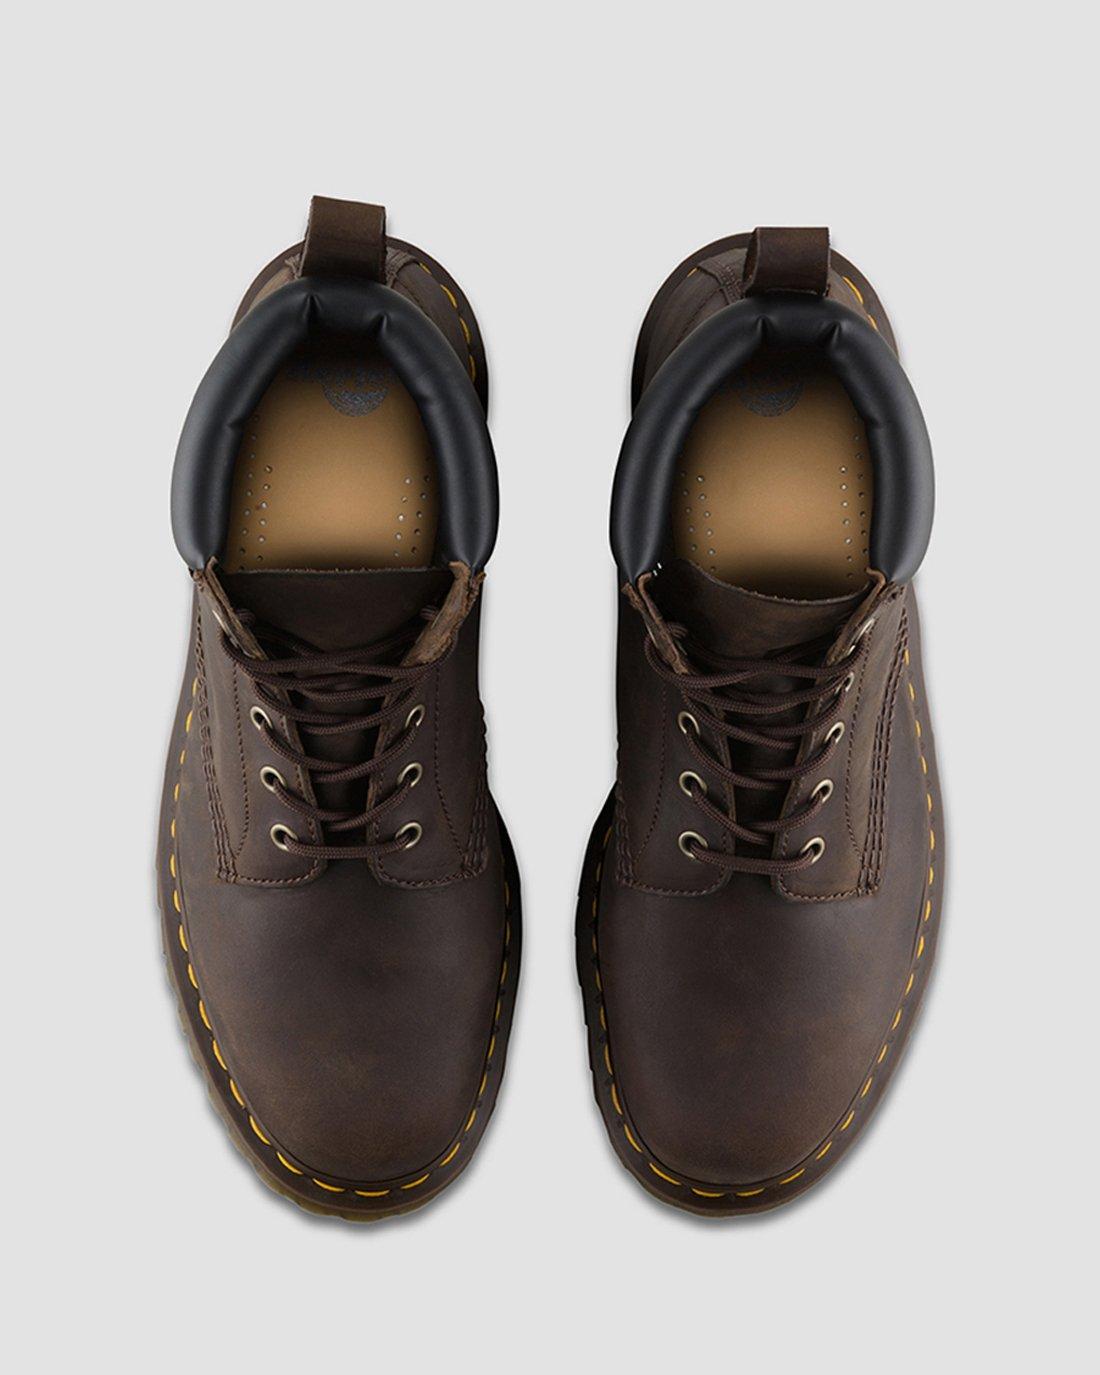 939 CRAZY HORSE LEATHER BOOTS | Dr. Martens